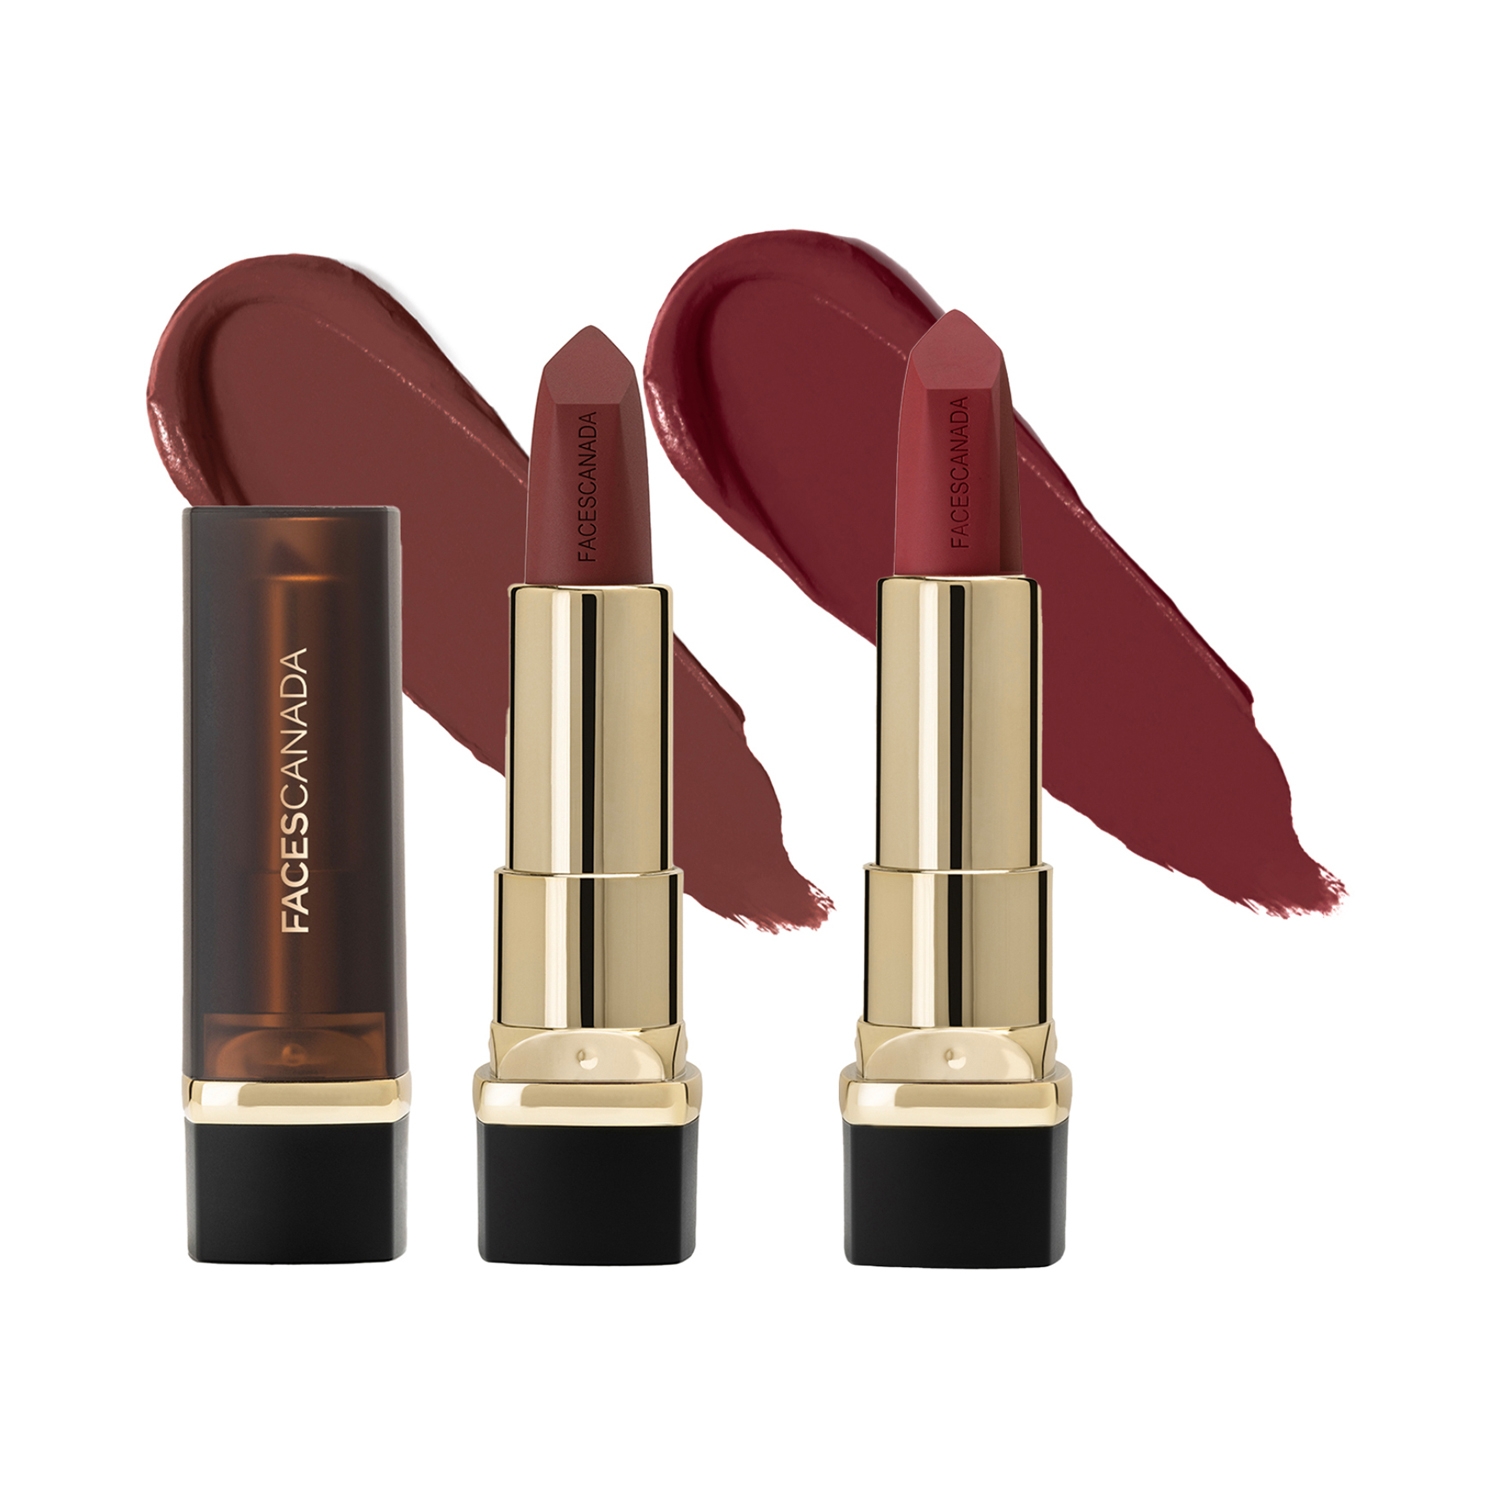 Faces Canada | Faces Canada Comfy Matte Creme Lipstick Combo Pack - Raise The Roof, Not A Quitter (2pcs)